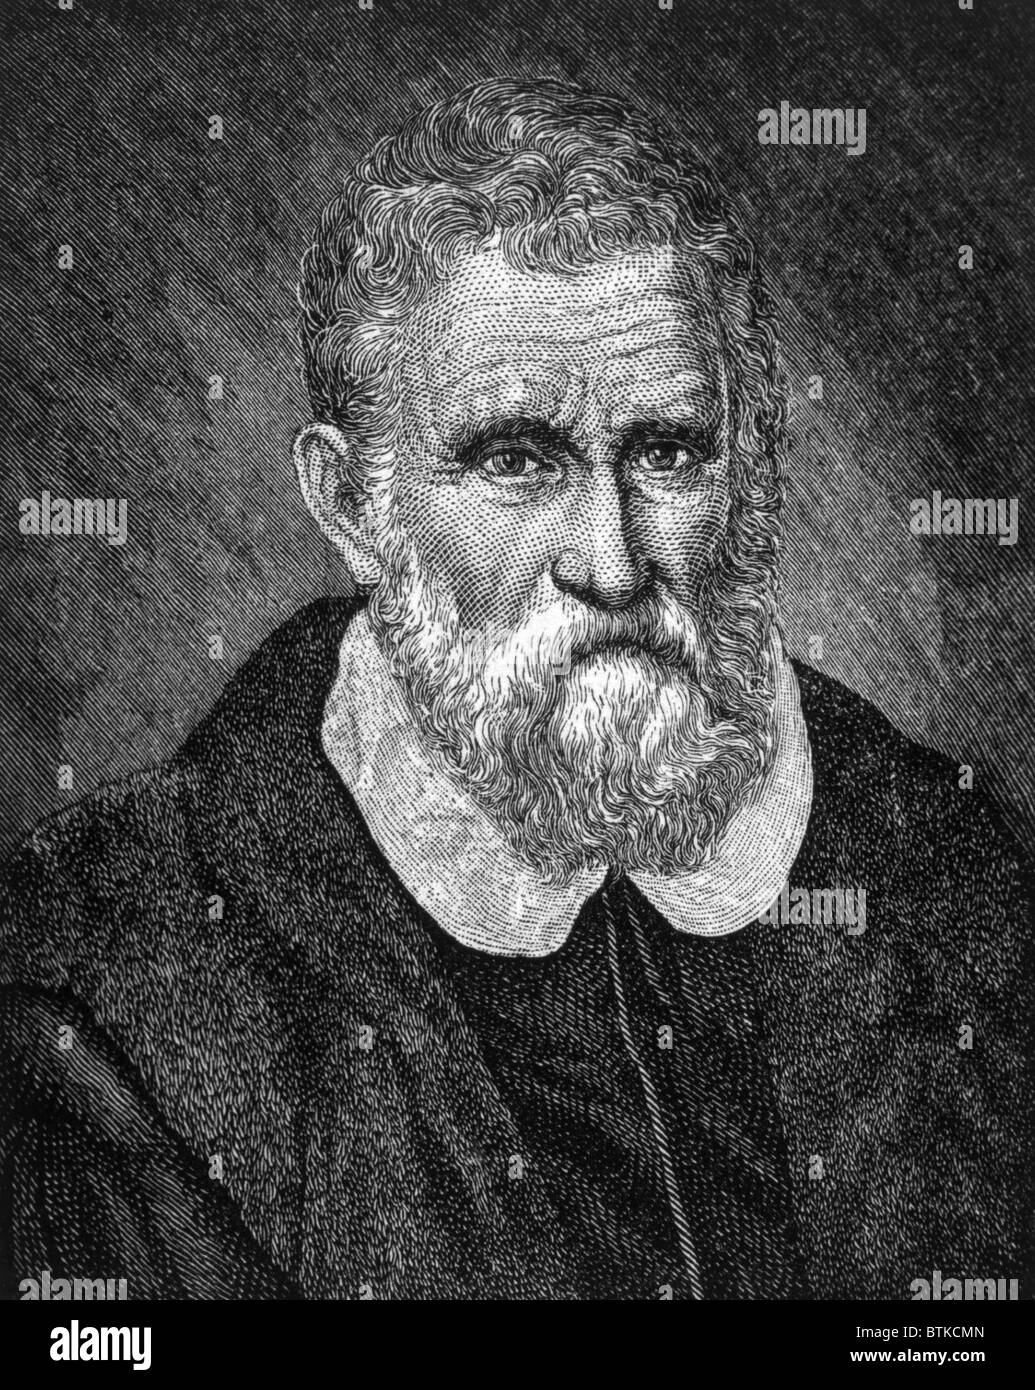 Marco Polo Portrait High Resolution Stock Photography and Images - Alamy